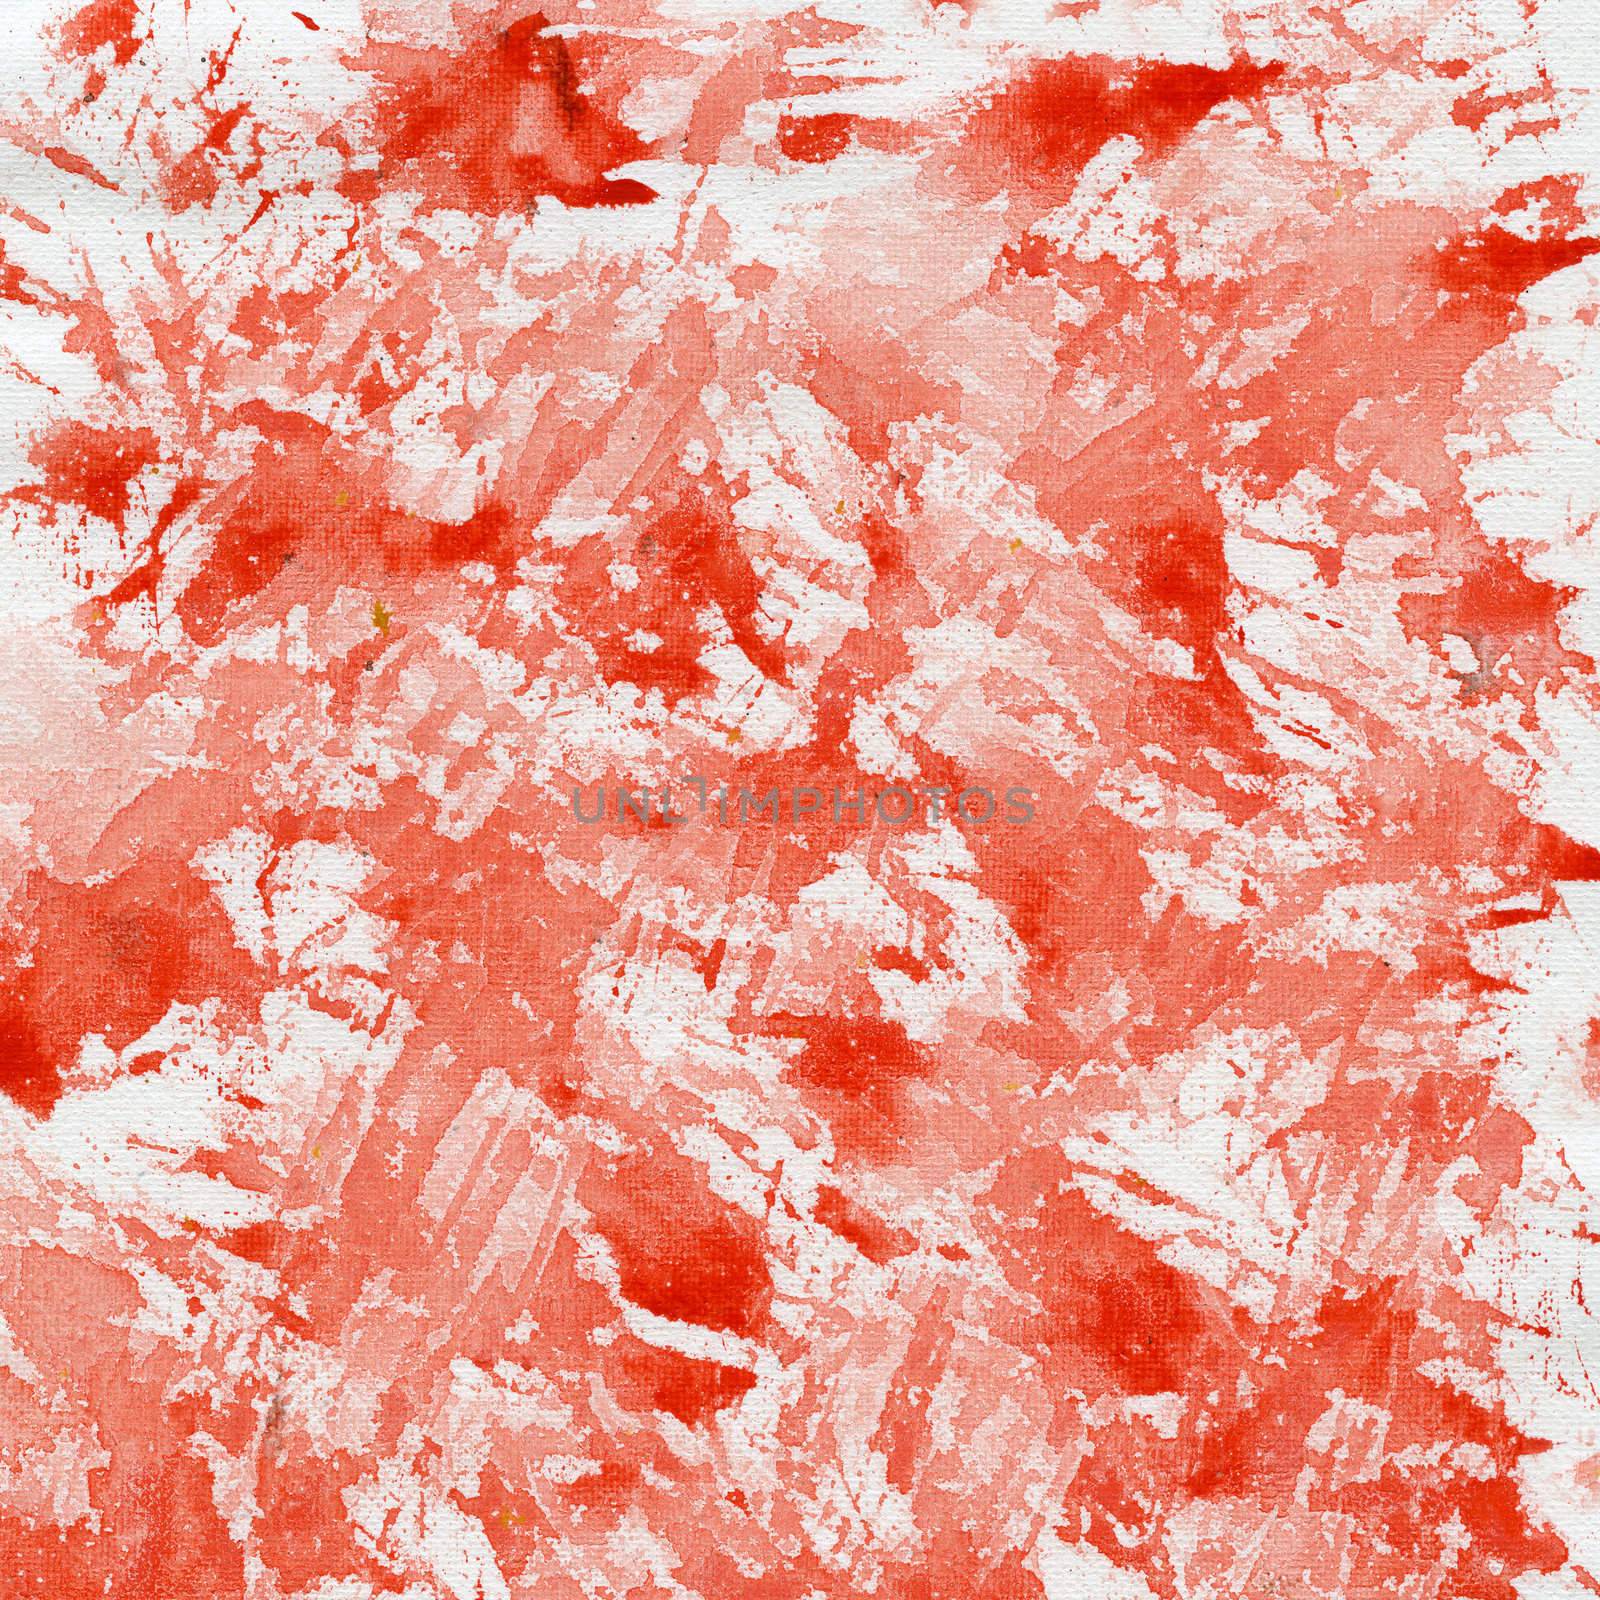 abstract background - splashes of red watercolor paint on white artist canvas